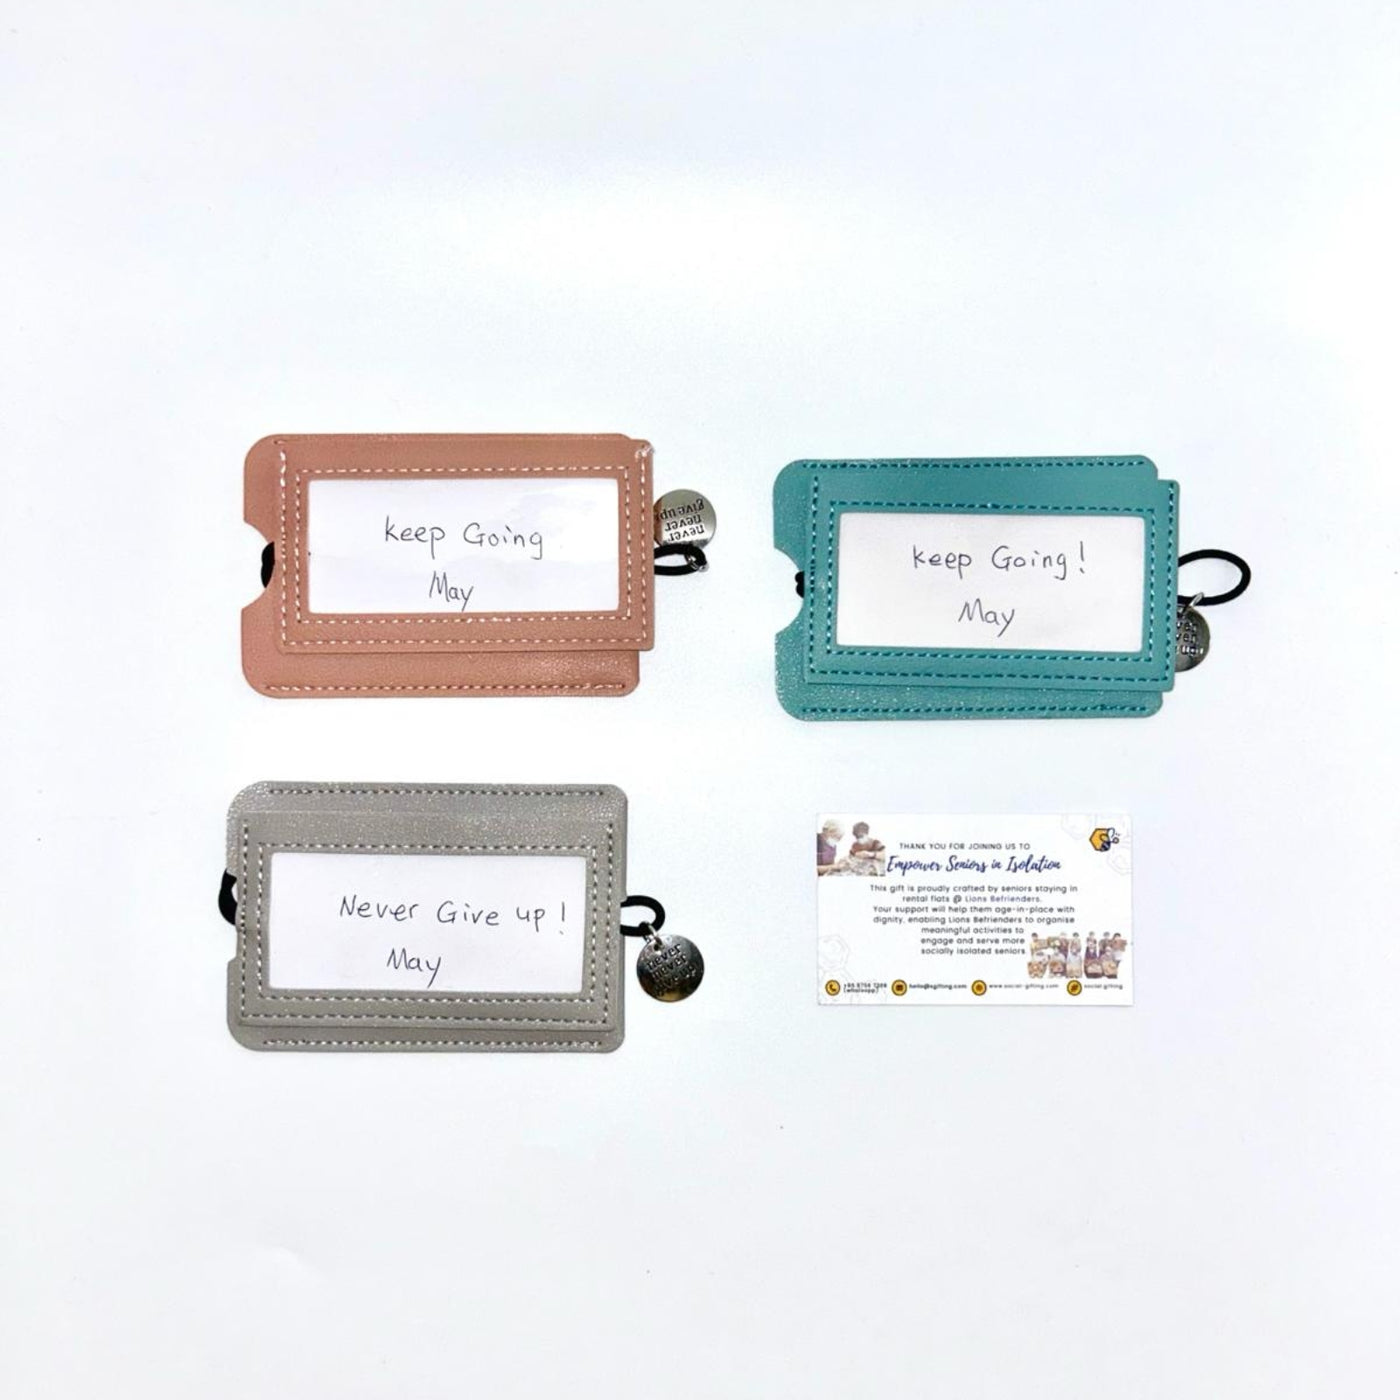 PU Leather Luggage Tag with Motivational Charm and Message